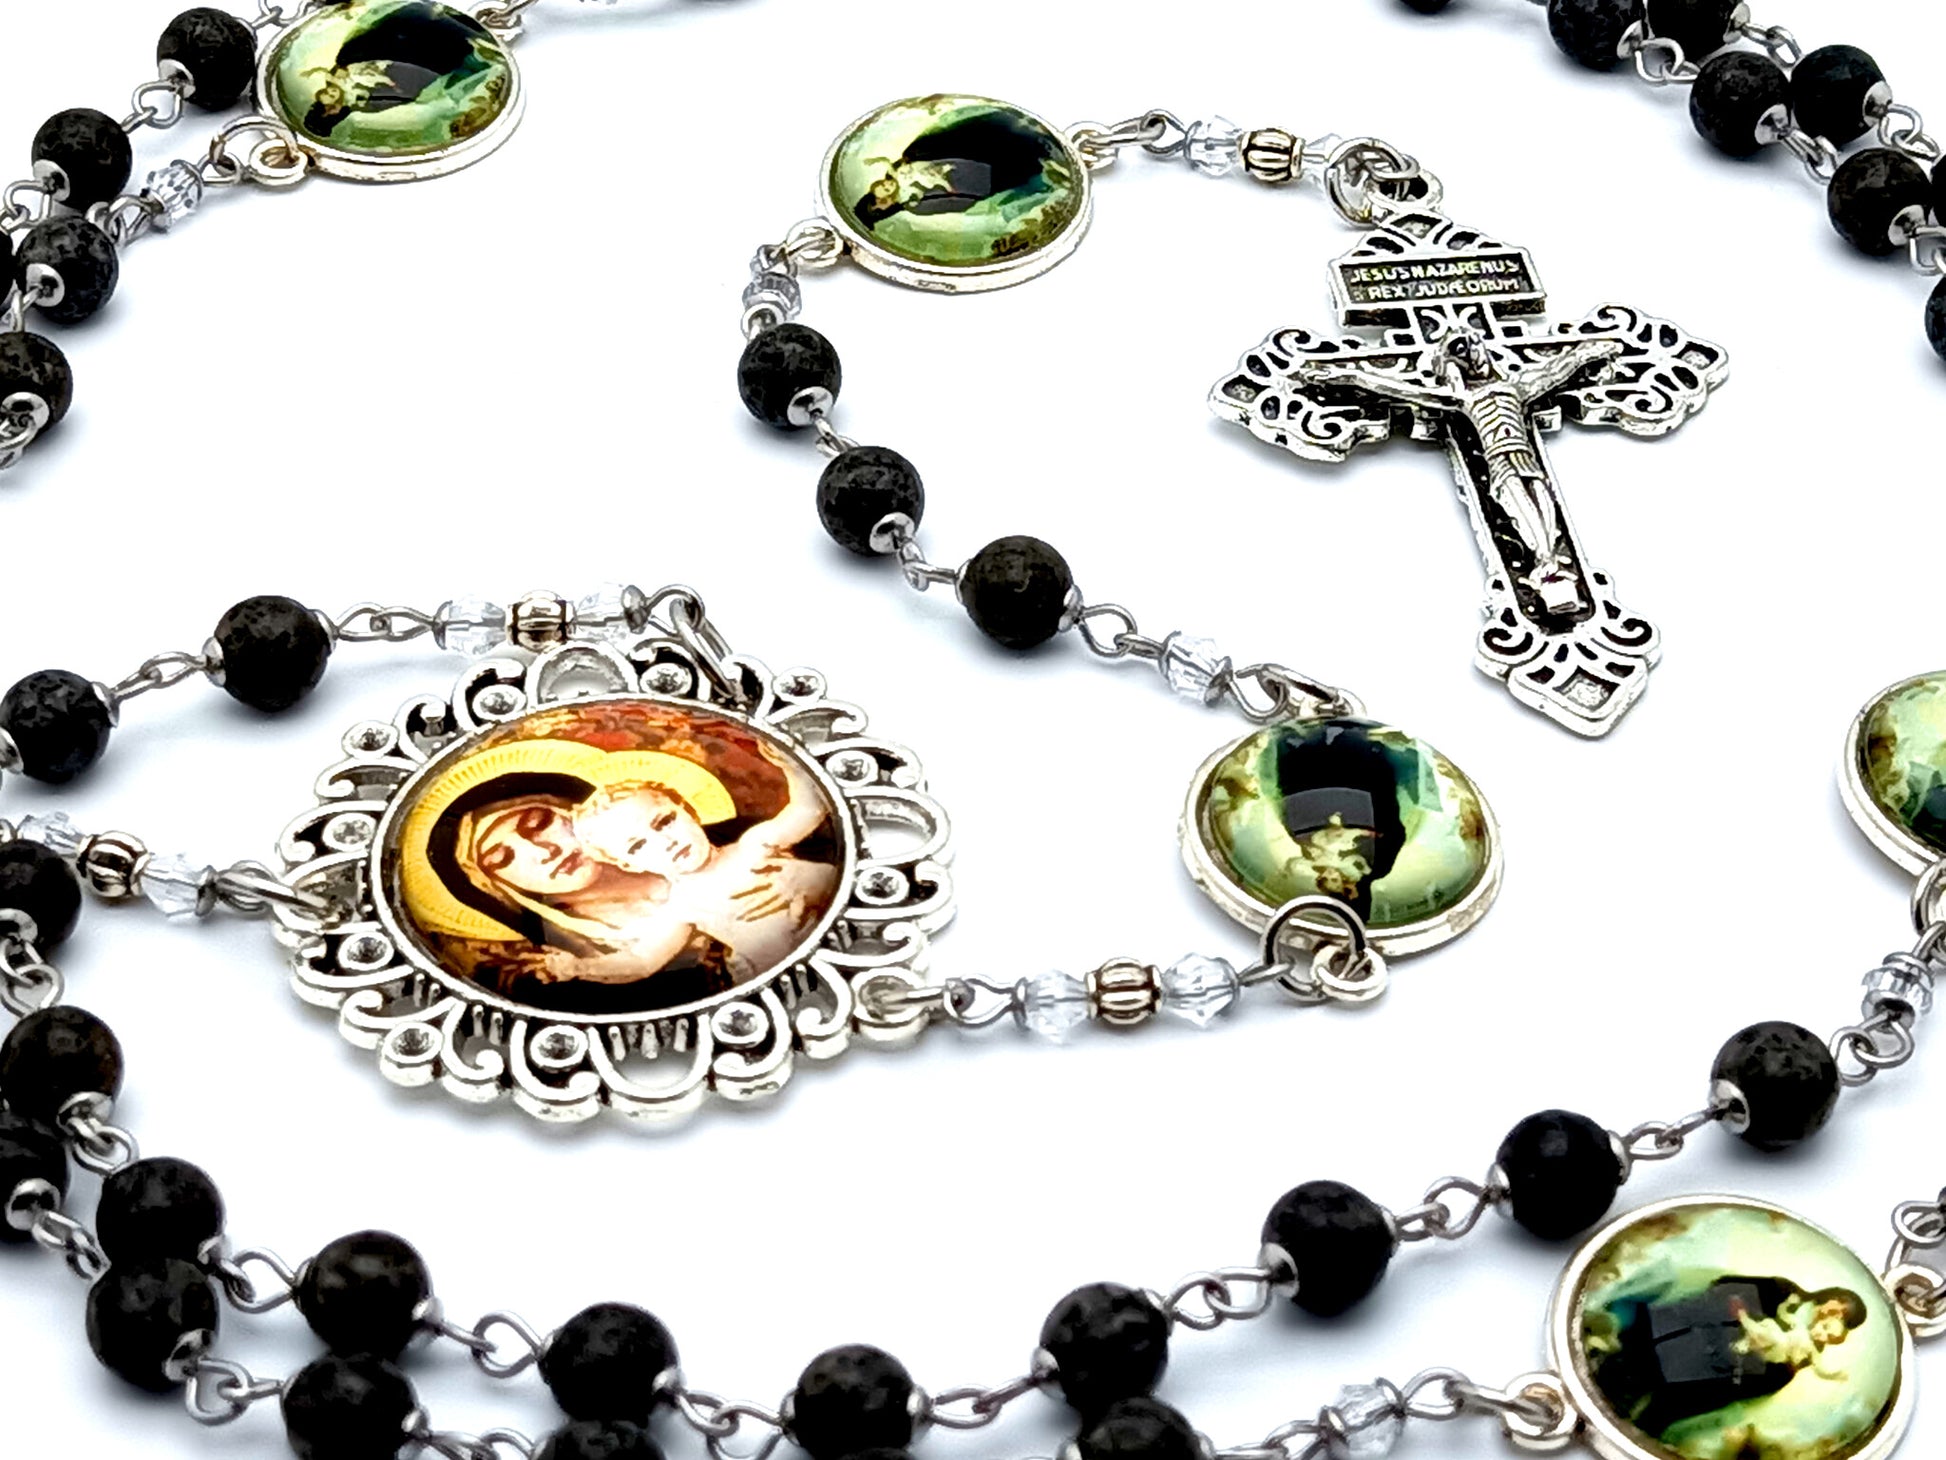 Our Lady of Laus unique rosary beads with jasper gemstone beads and pardon crucifix and Virgin Mary and child Jesus picture medals.